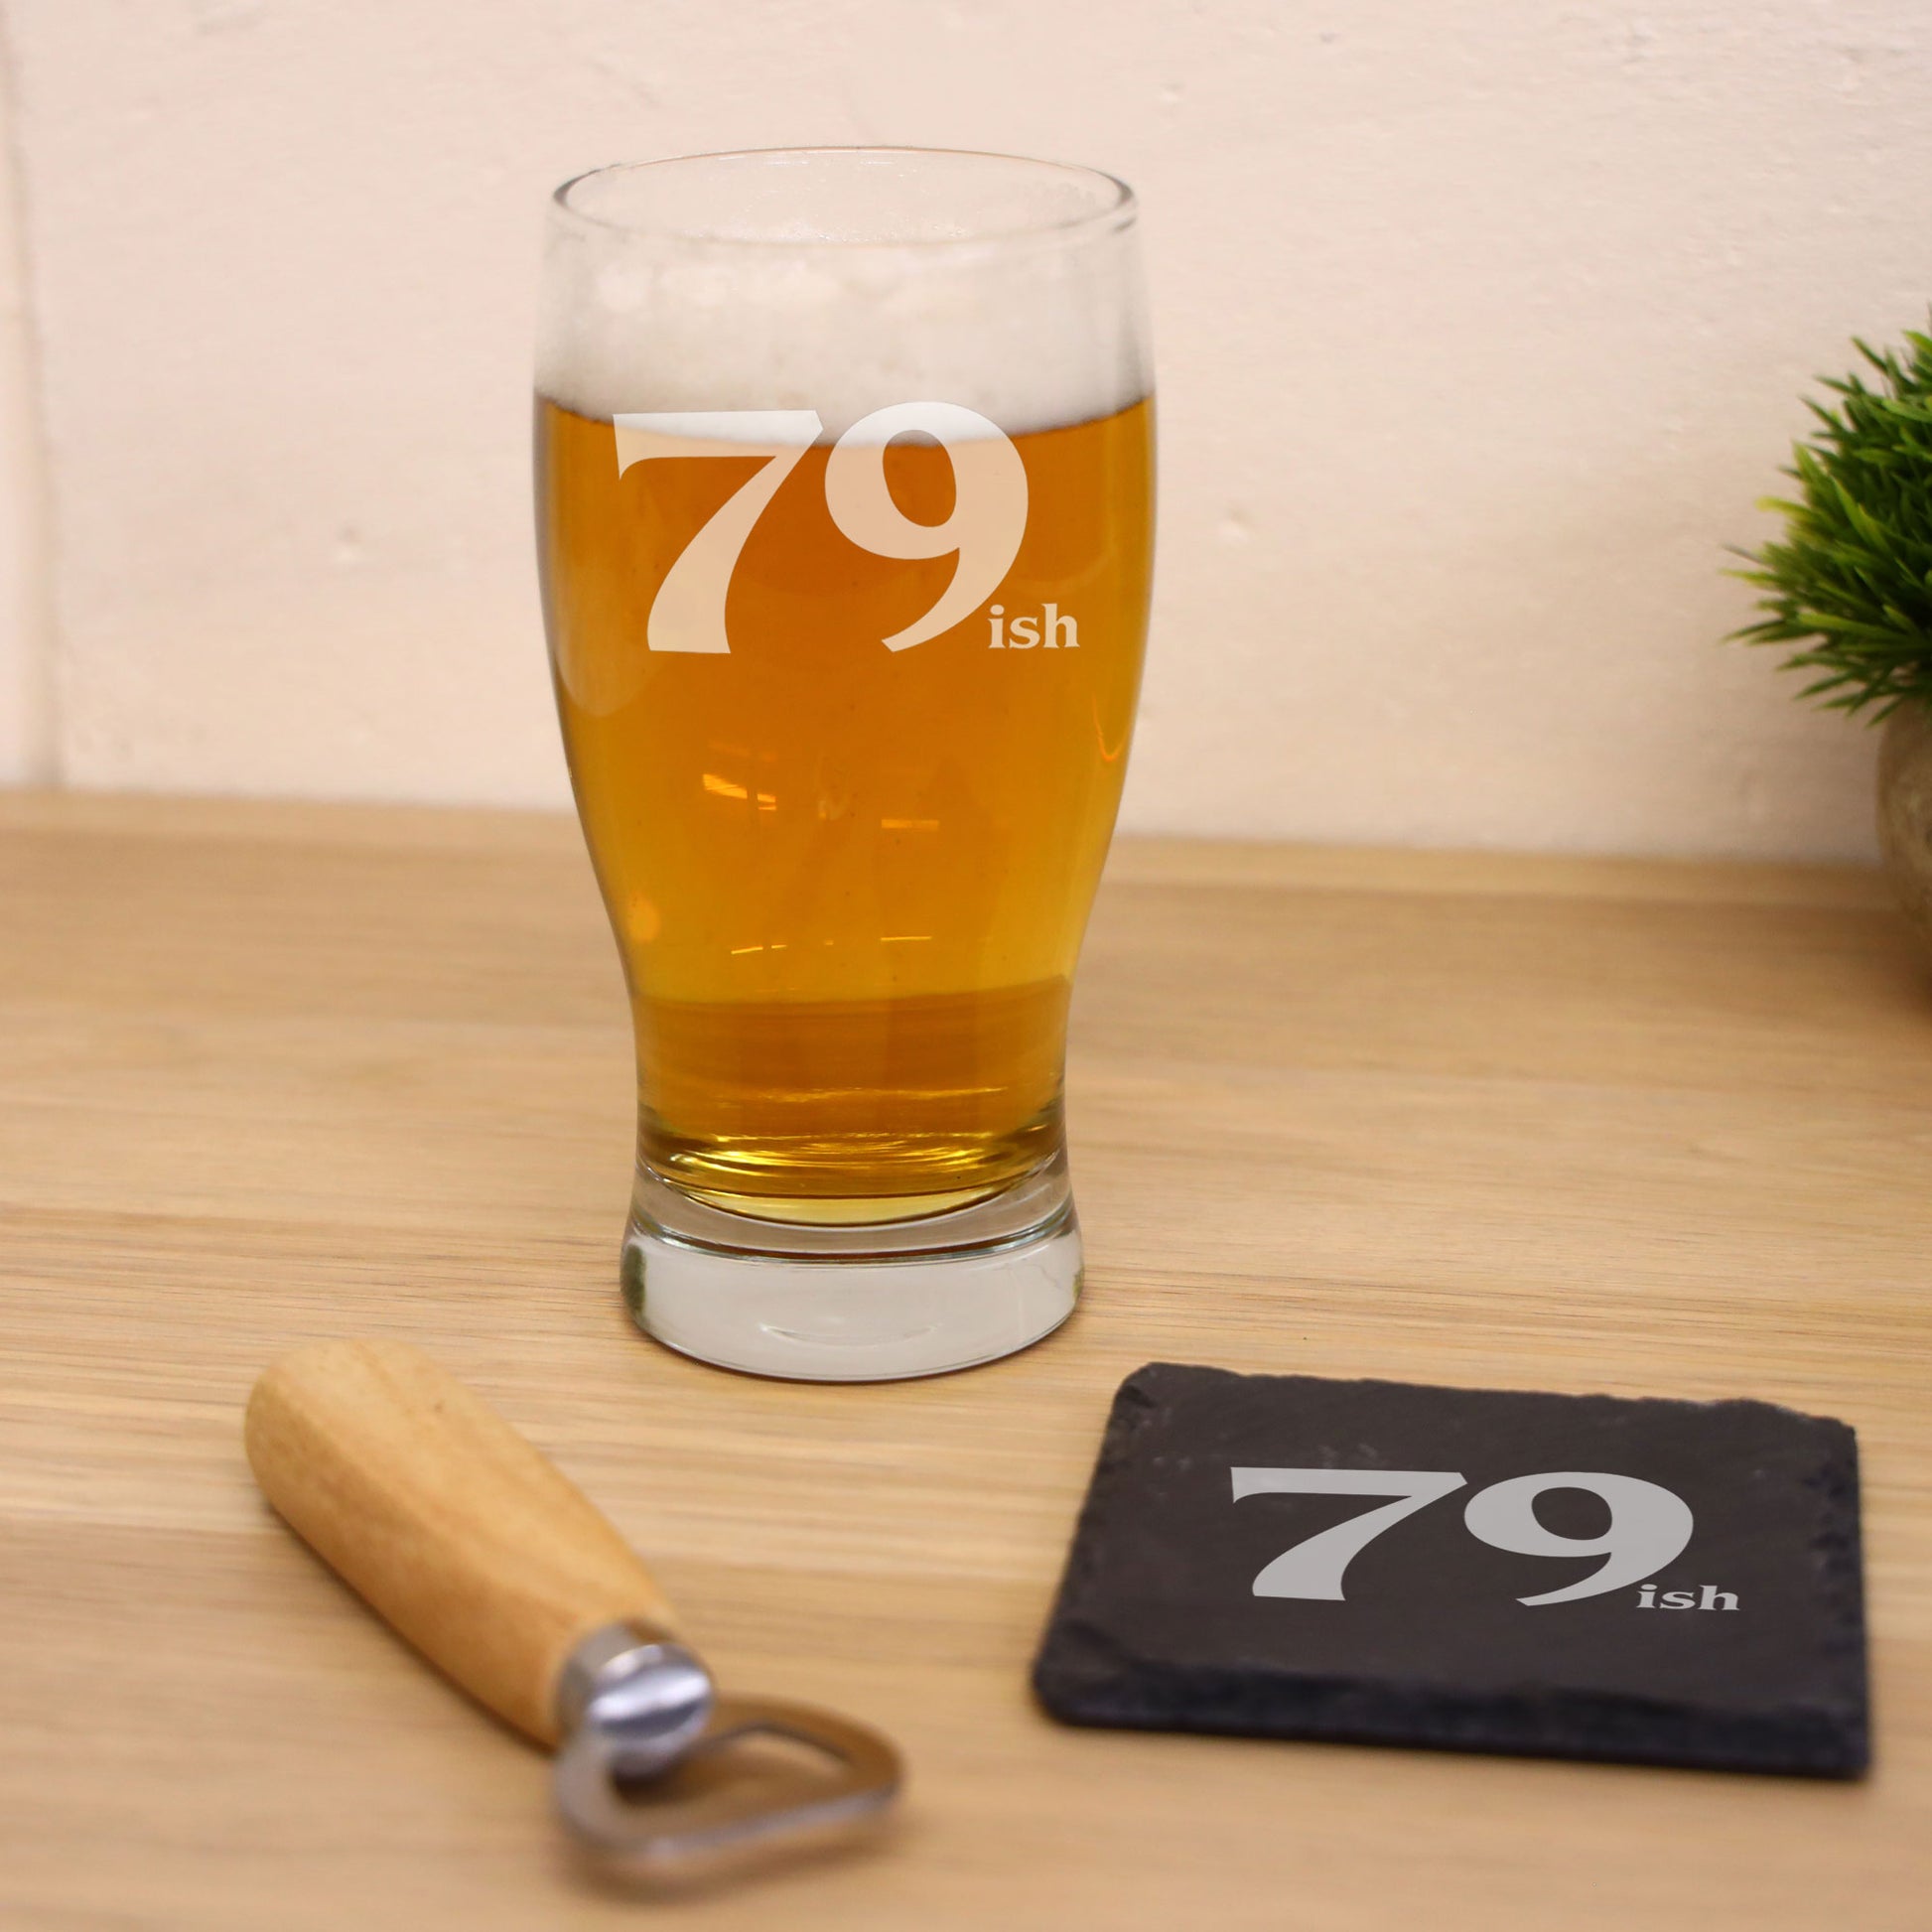 79ish Pint Glass and/or Coaster Set  - Always Looking Good - Glass & Square Coaster Set  